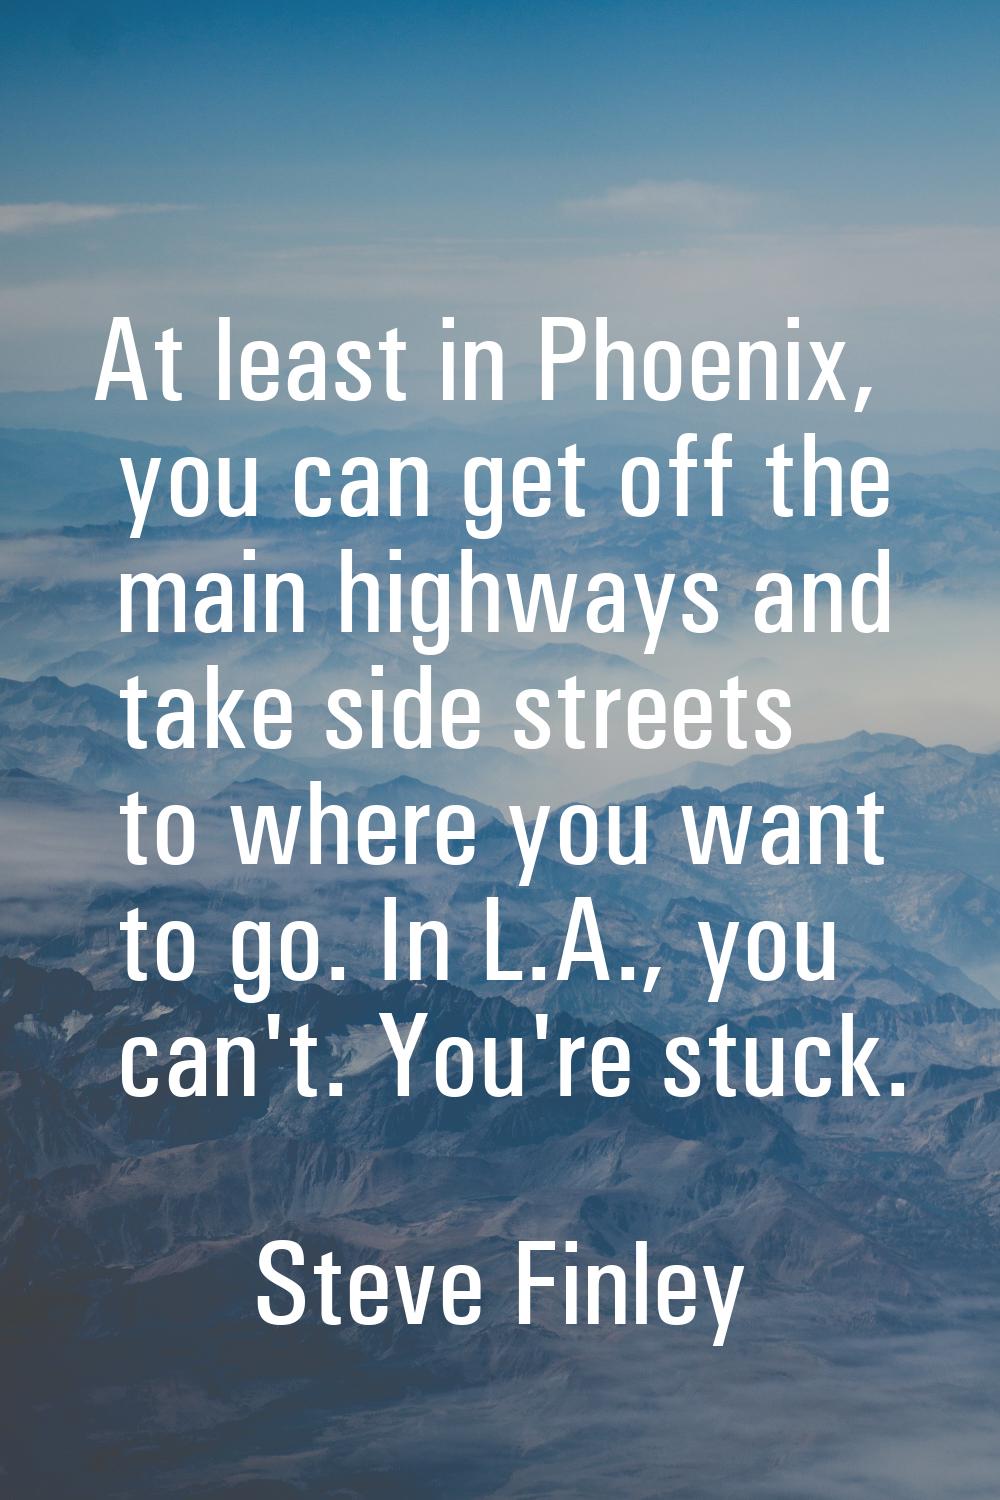 At least in Phoenix, you can get off the main highways and take side streets to where you want to g